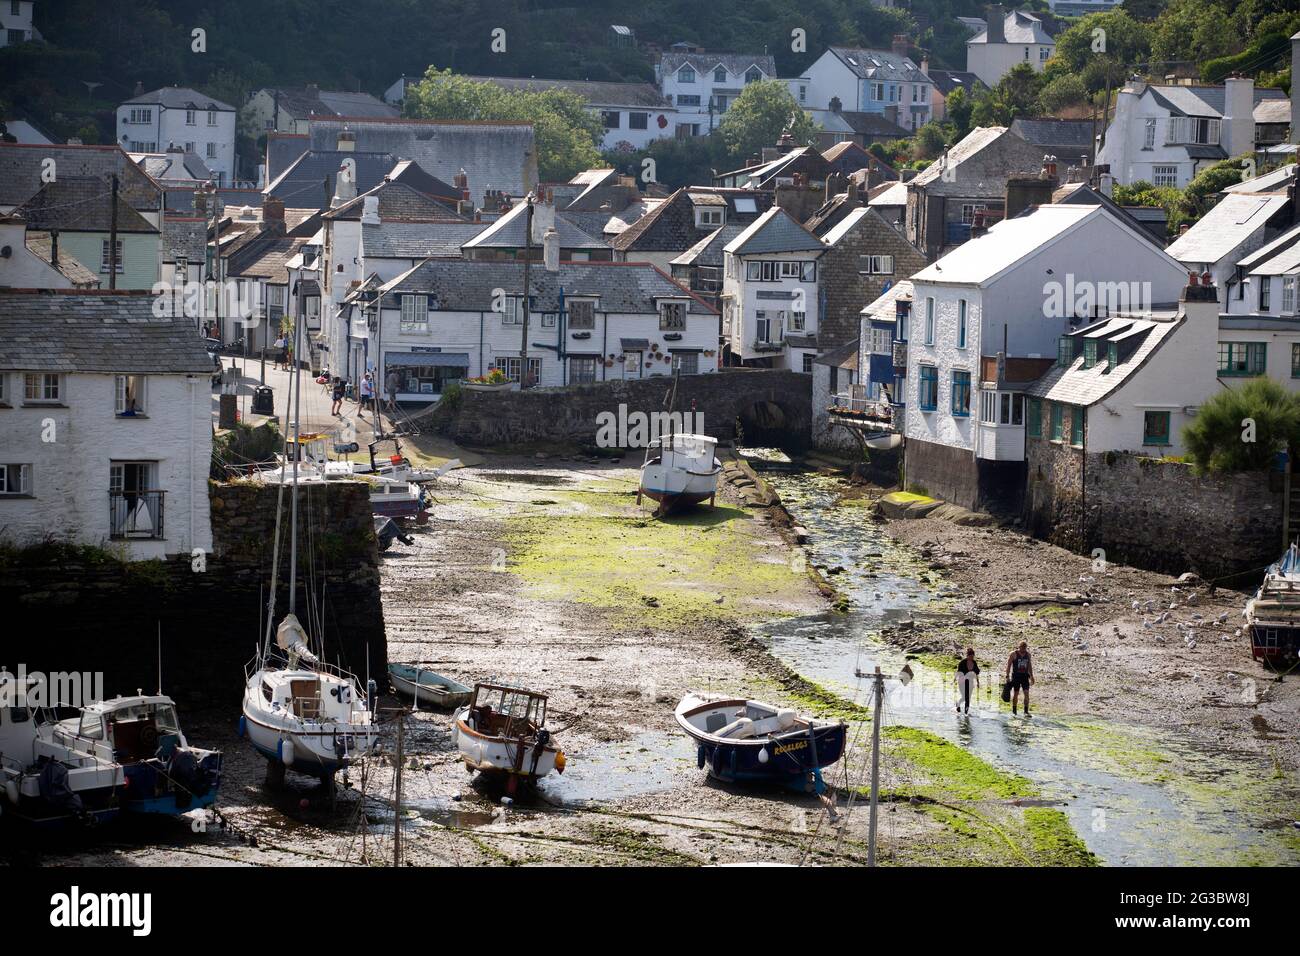 With the tide out a couple stroll among the boats in the small picturesque fishing village and harbour town of Polperro in south Cornwall. As the Coro Stock Photo